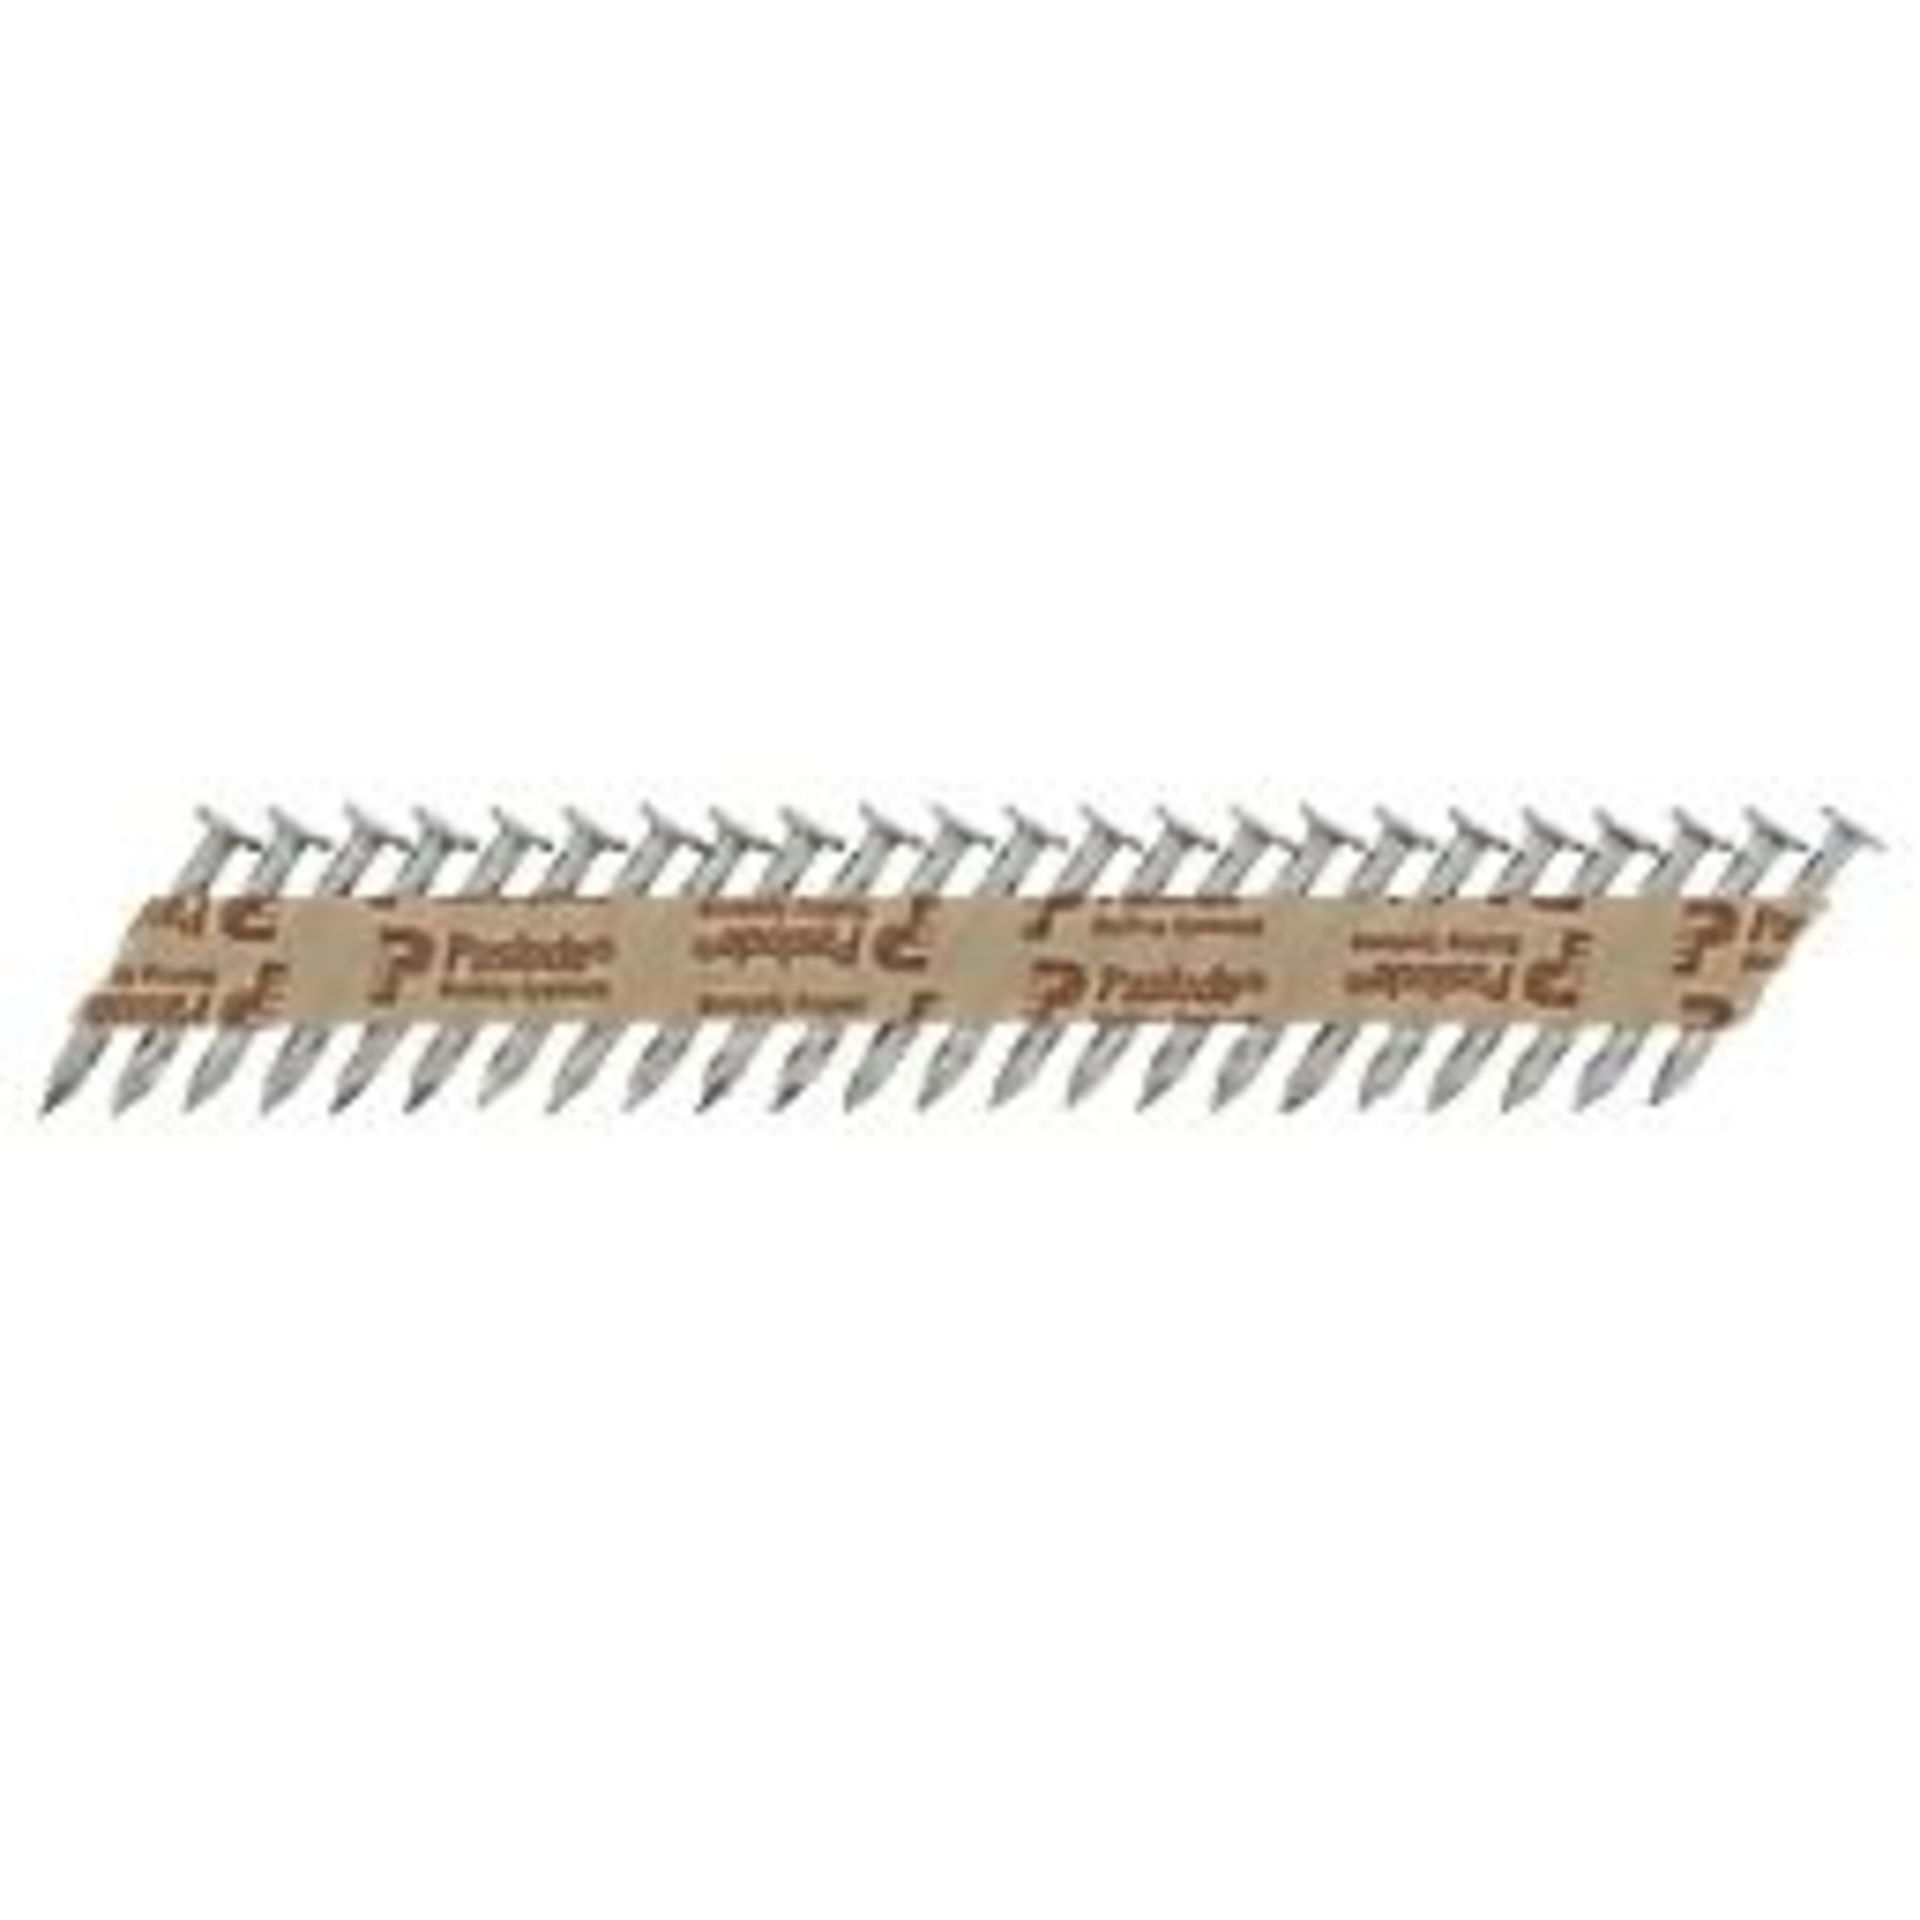 PASLODE GALVANISED PPN35CI COLLATED NAILS 3.4MM X 35MM 2500 PACK. - ER46. RRP £139.99